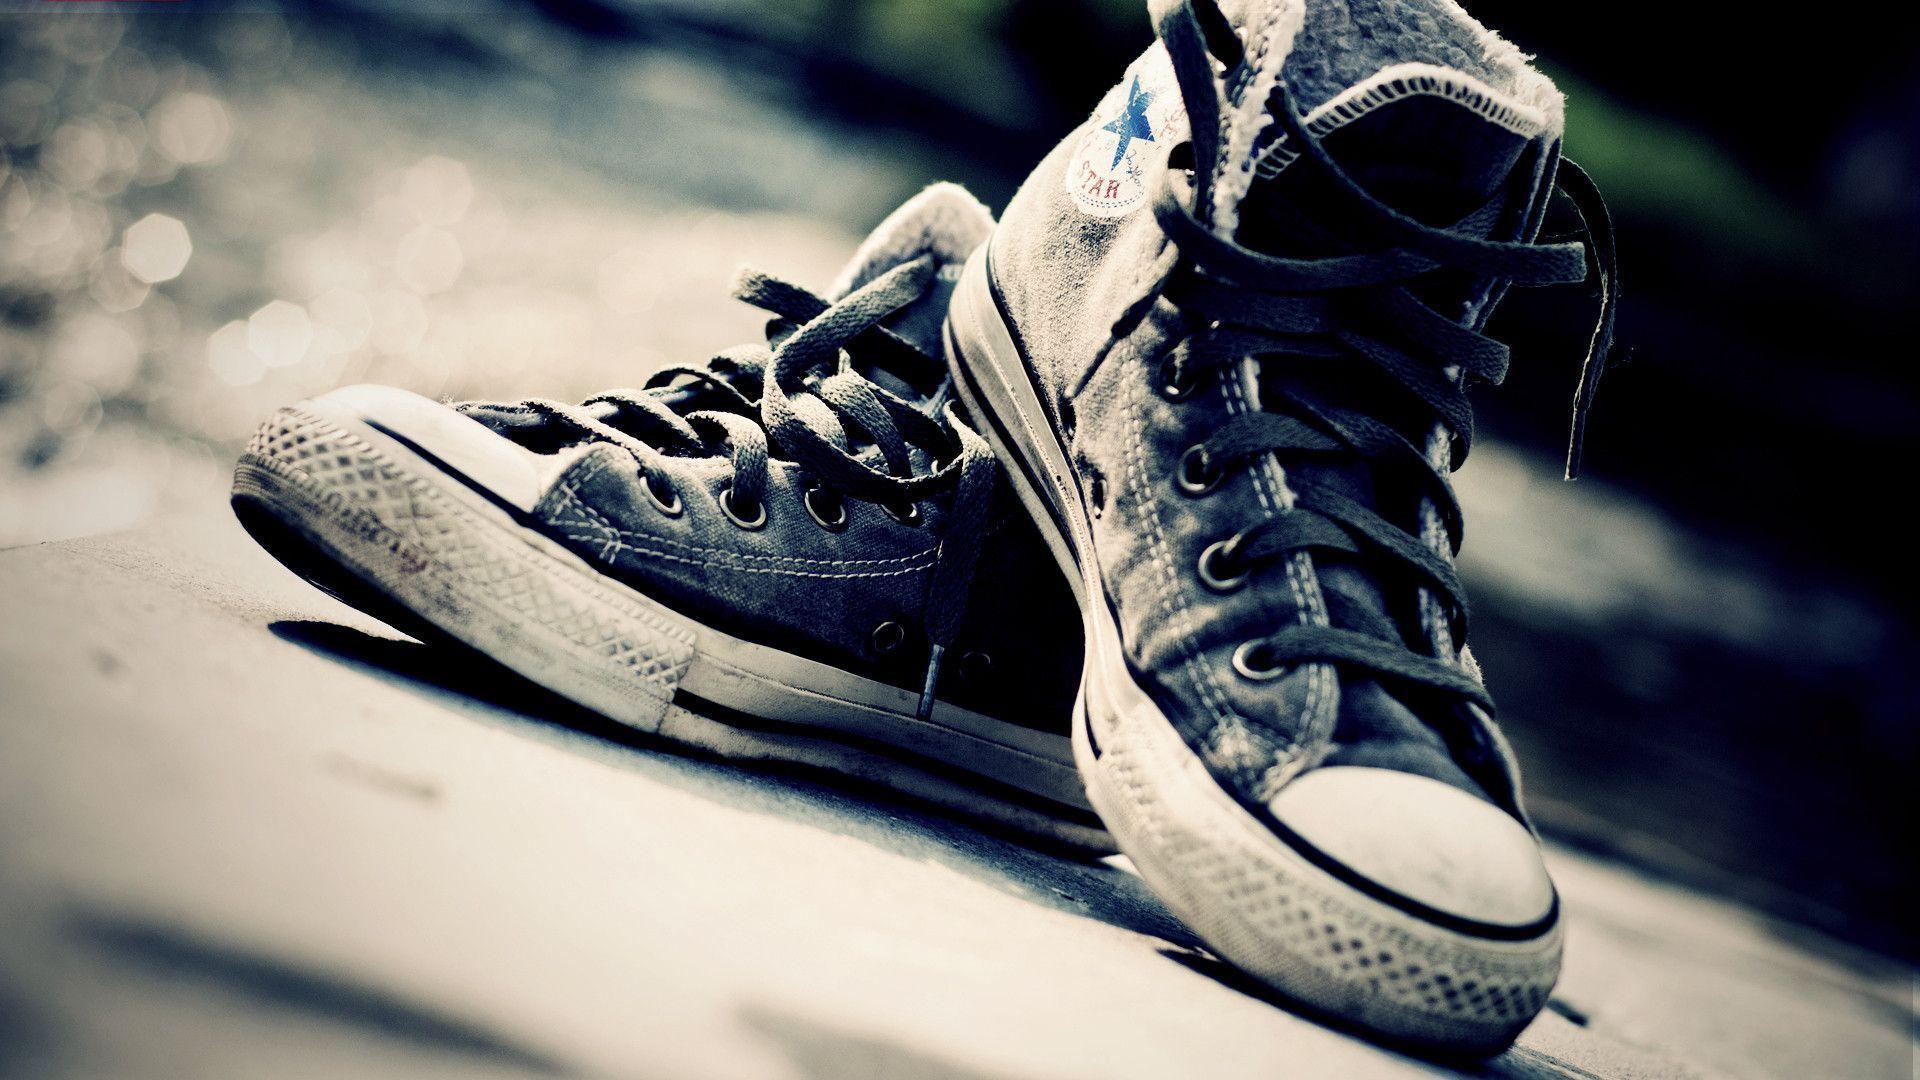 old pair of converse shoes Wallpaper